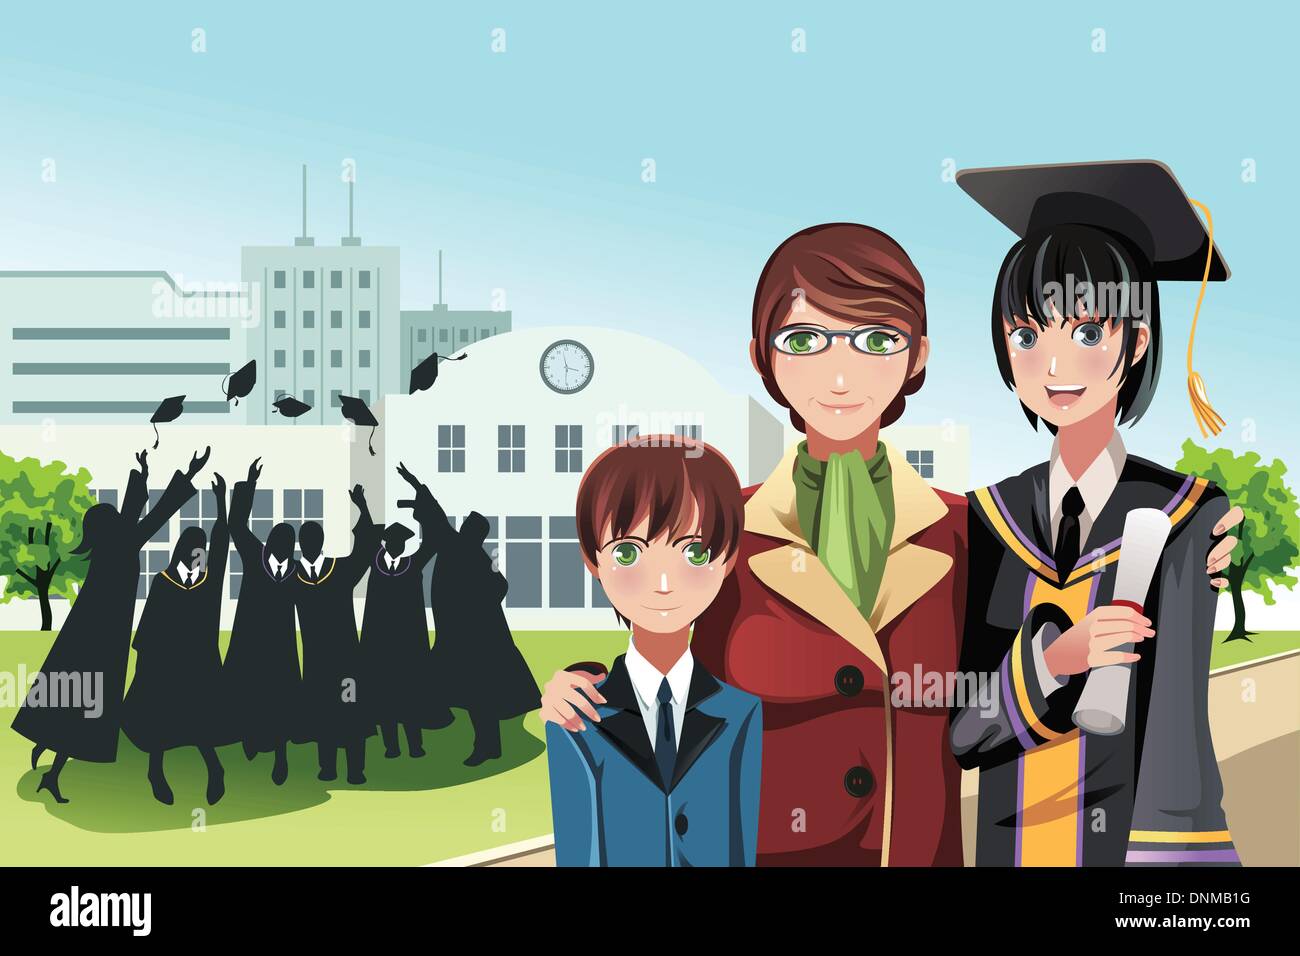 A vector illustration of a graduation girl holding her diploma posing with her mother and brother with friends in the background Stock Vector